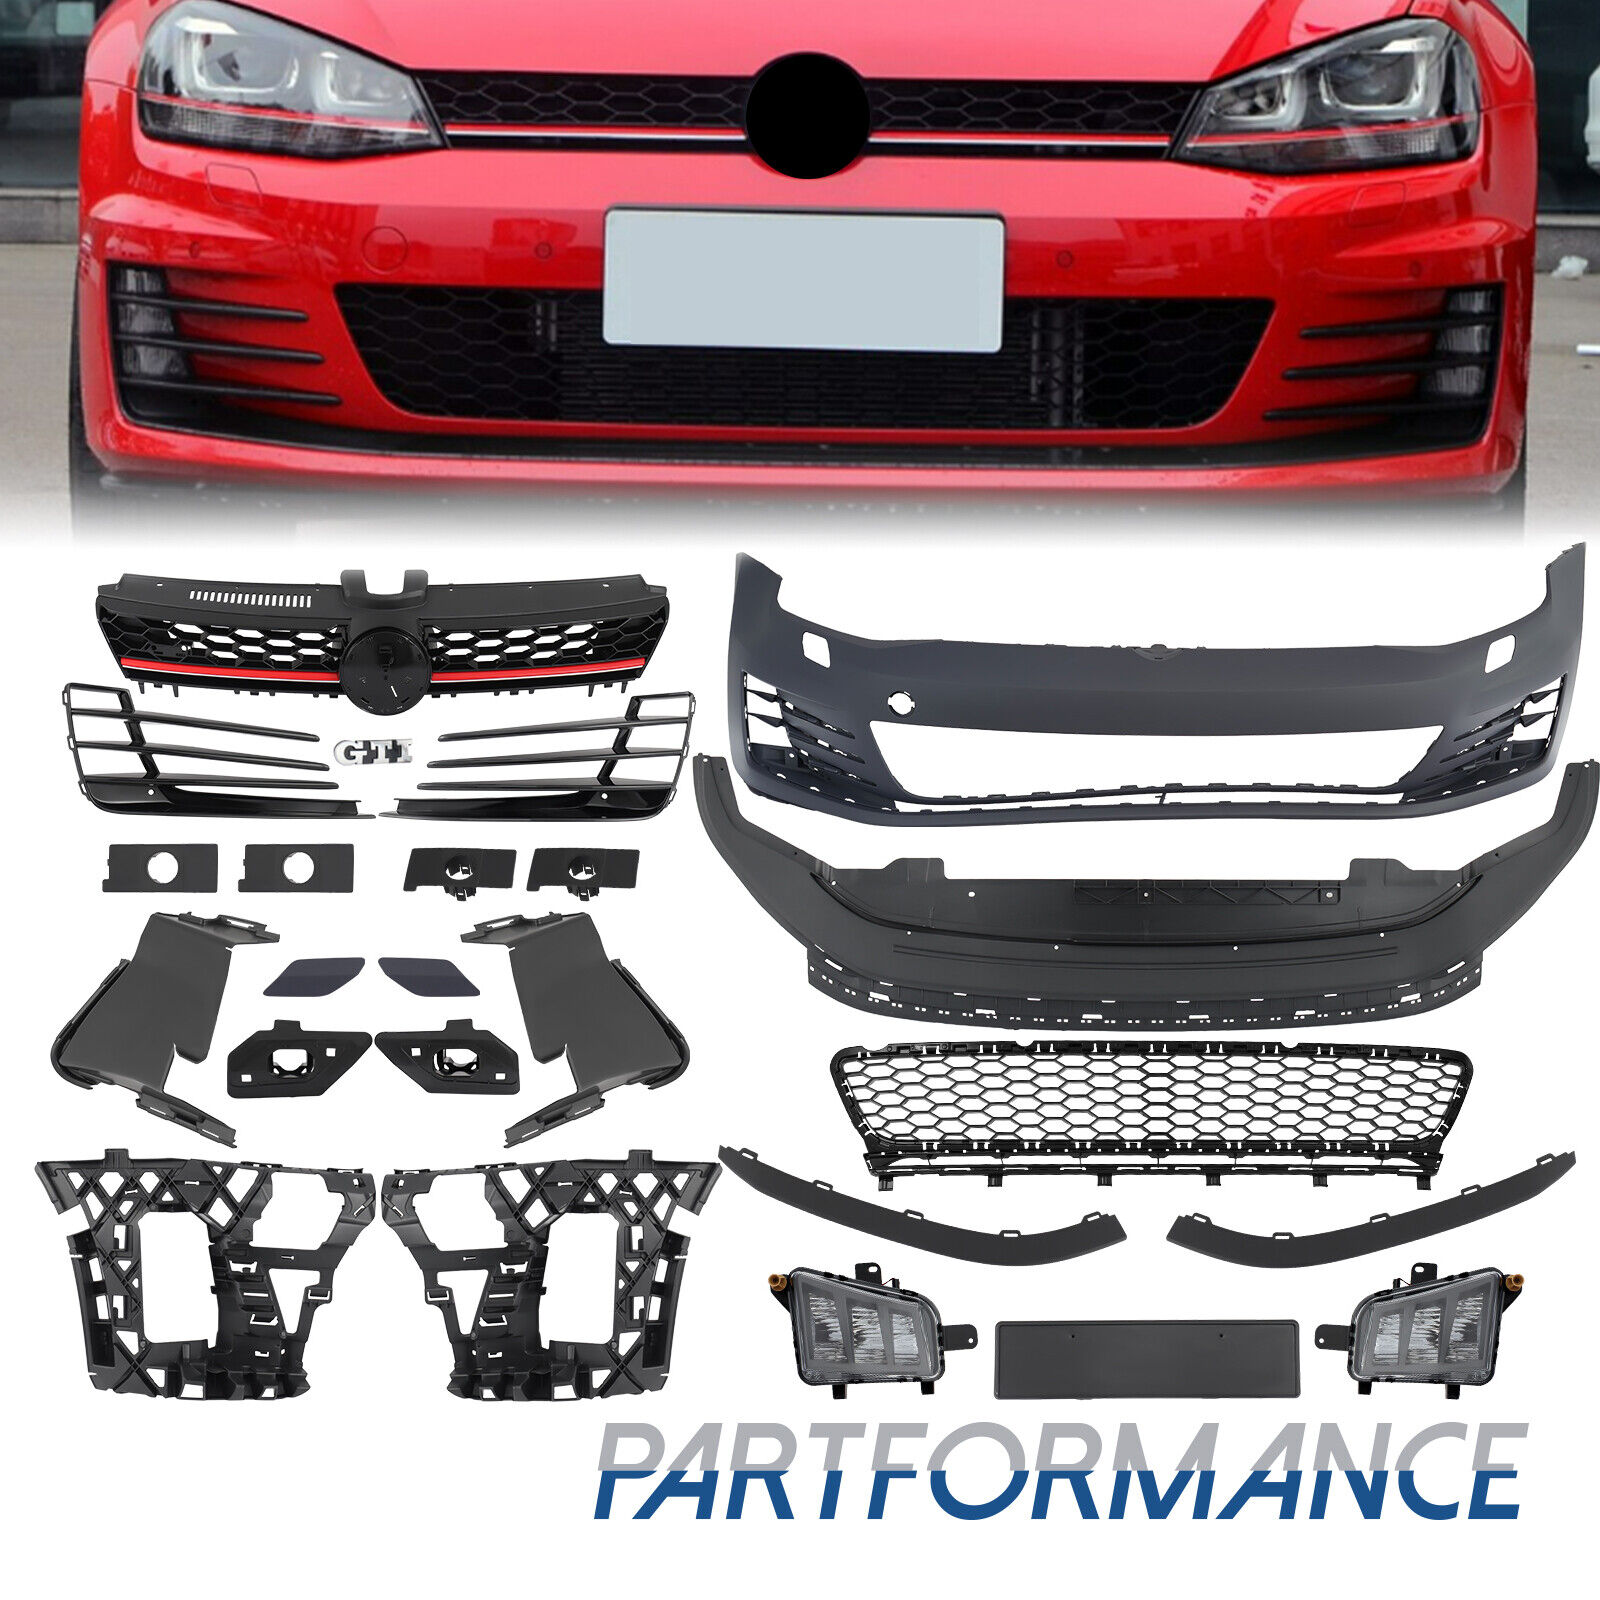 Front Bumper Cover Kit GTI Style Unpainted For 2015-2017 Volkswagen VW Golf MK7